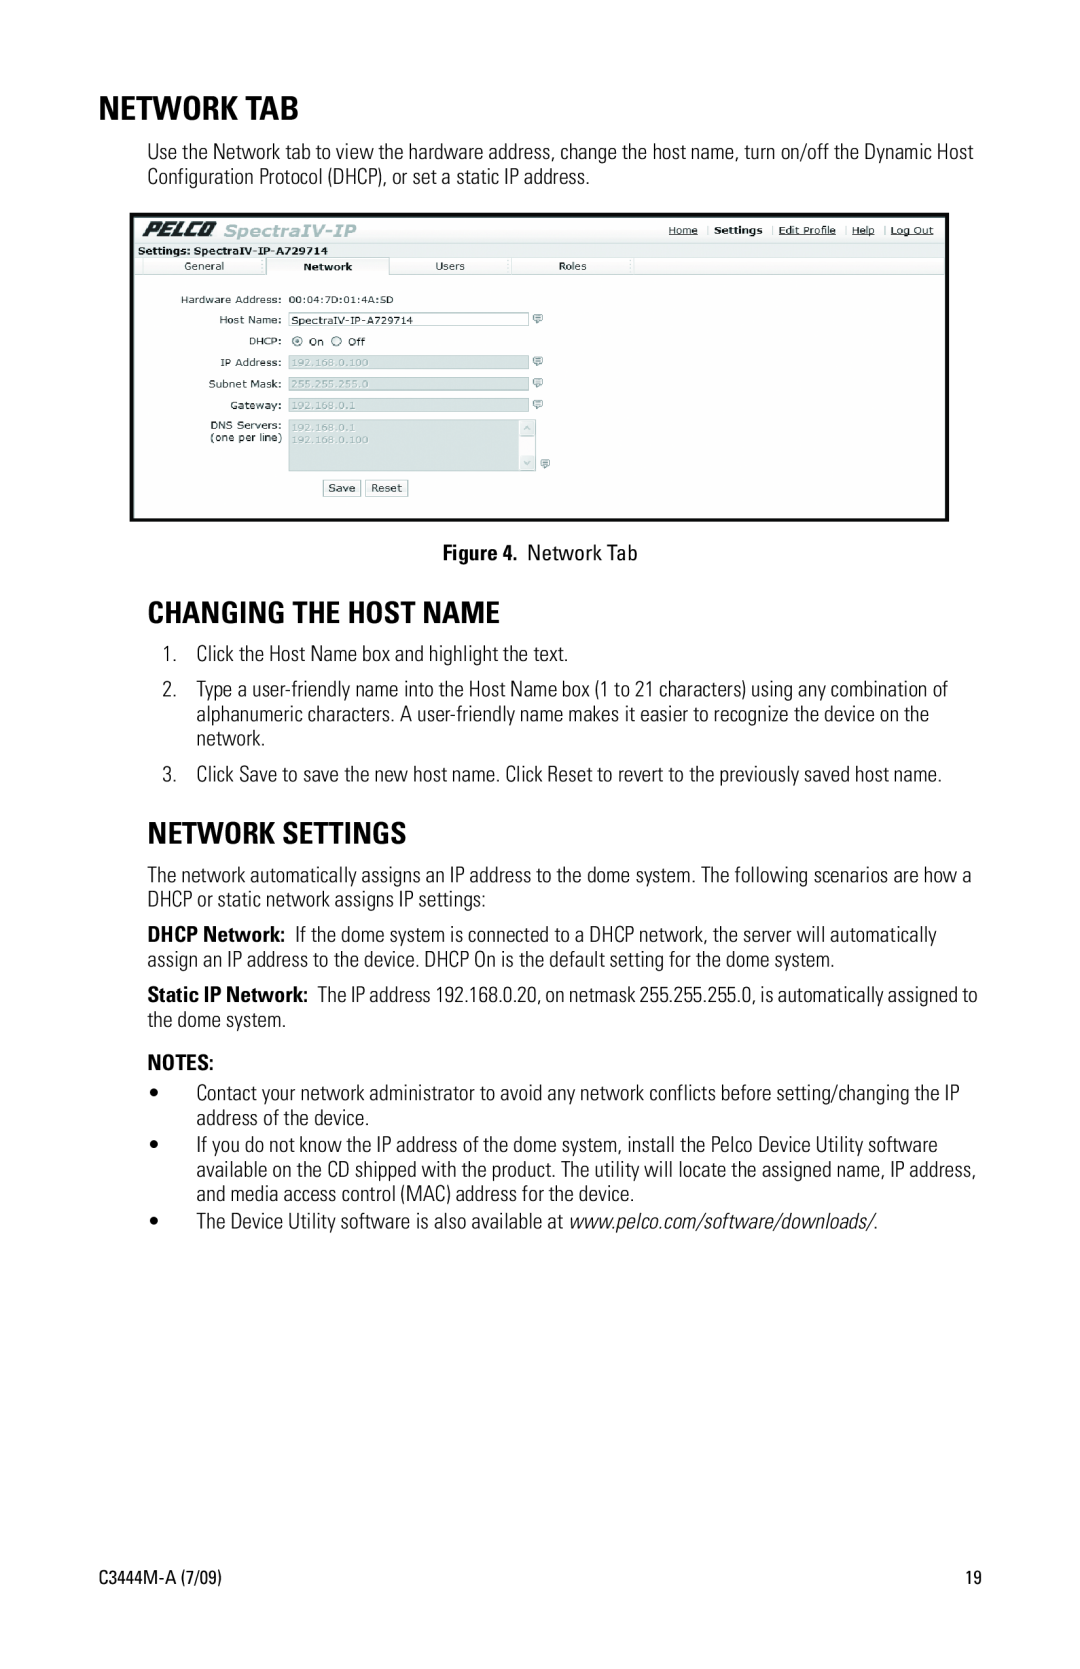 Pelco IV IP manual Network Tab, Changing The Host Name, Network Settings 